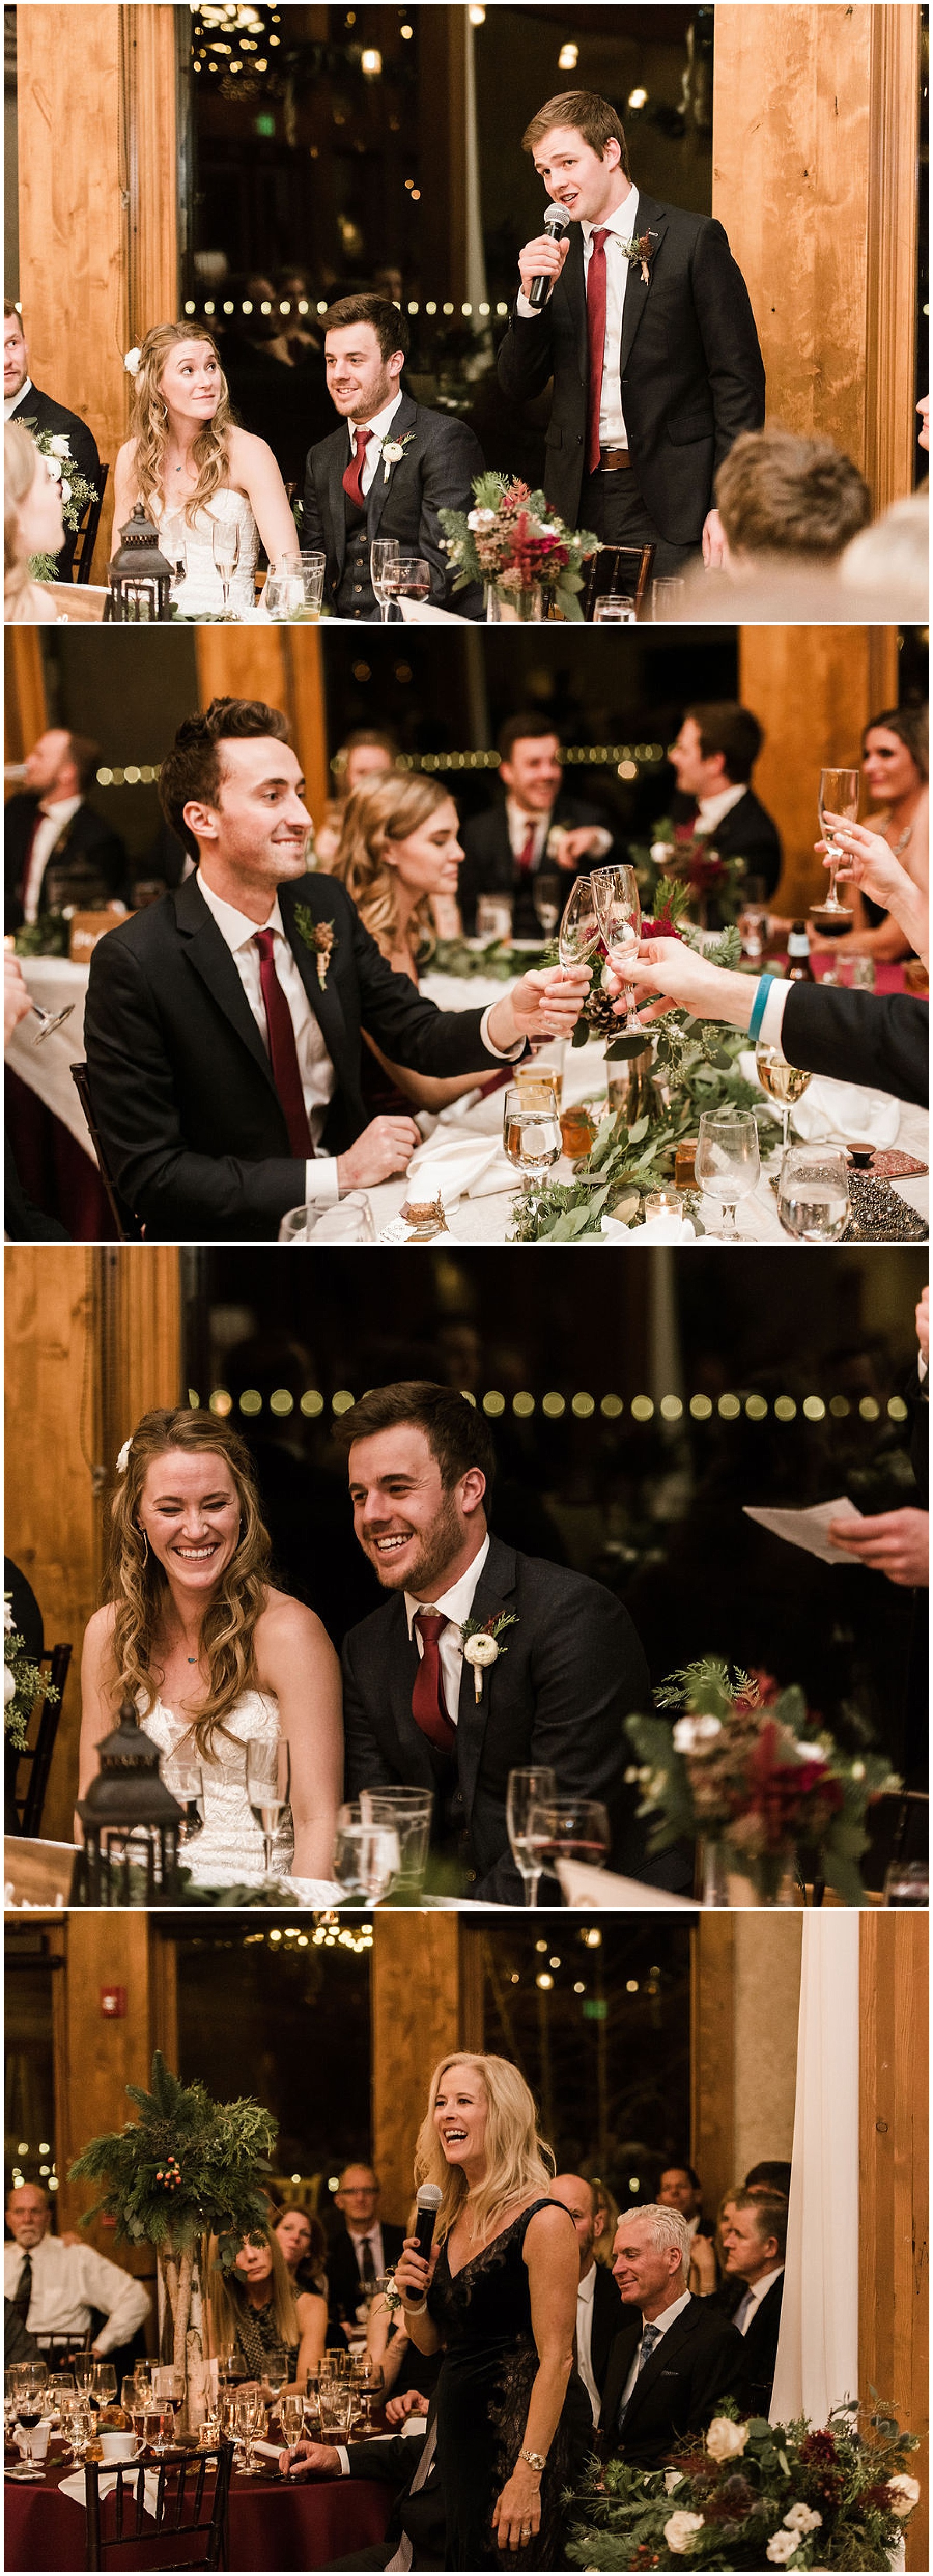 Katesalleyphotography-632_Haley and Dan get married in Estes Park.jpg